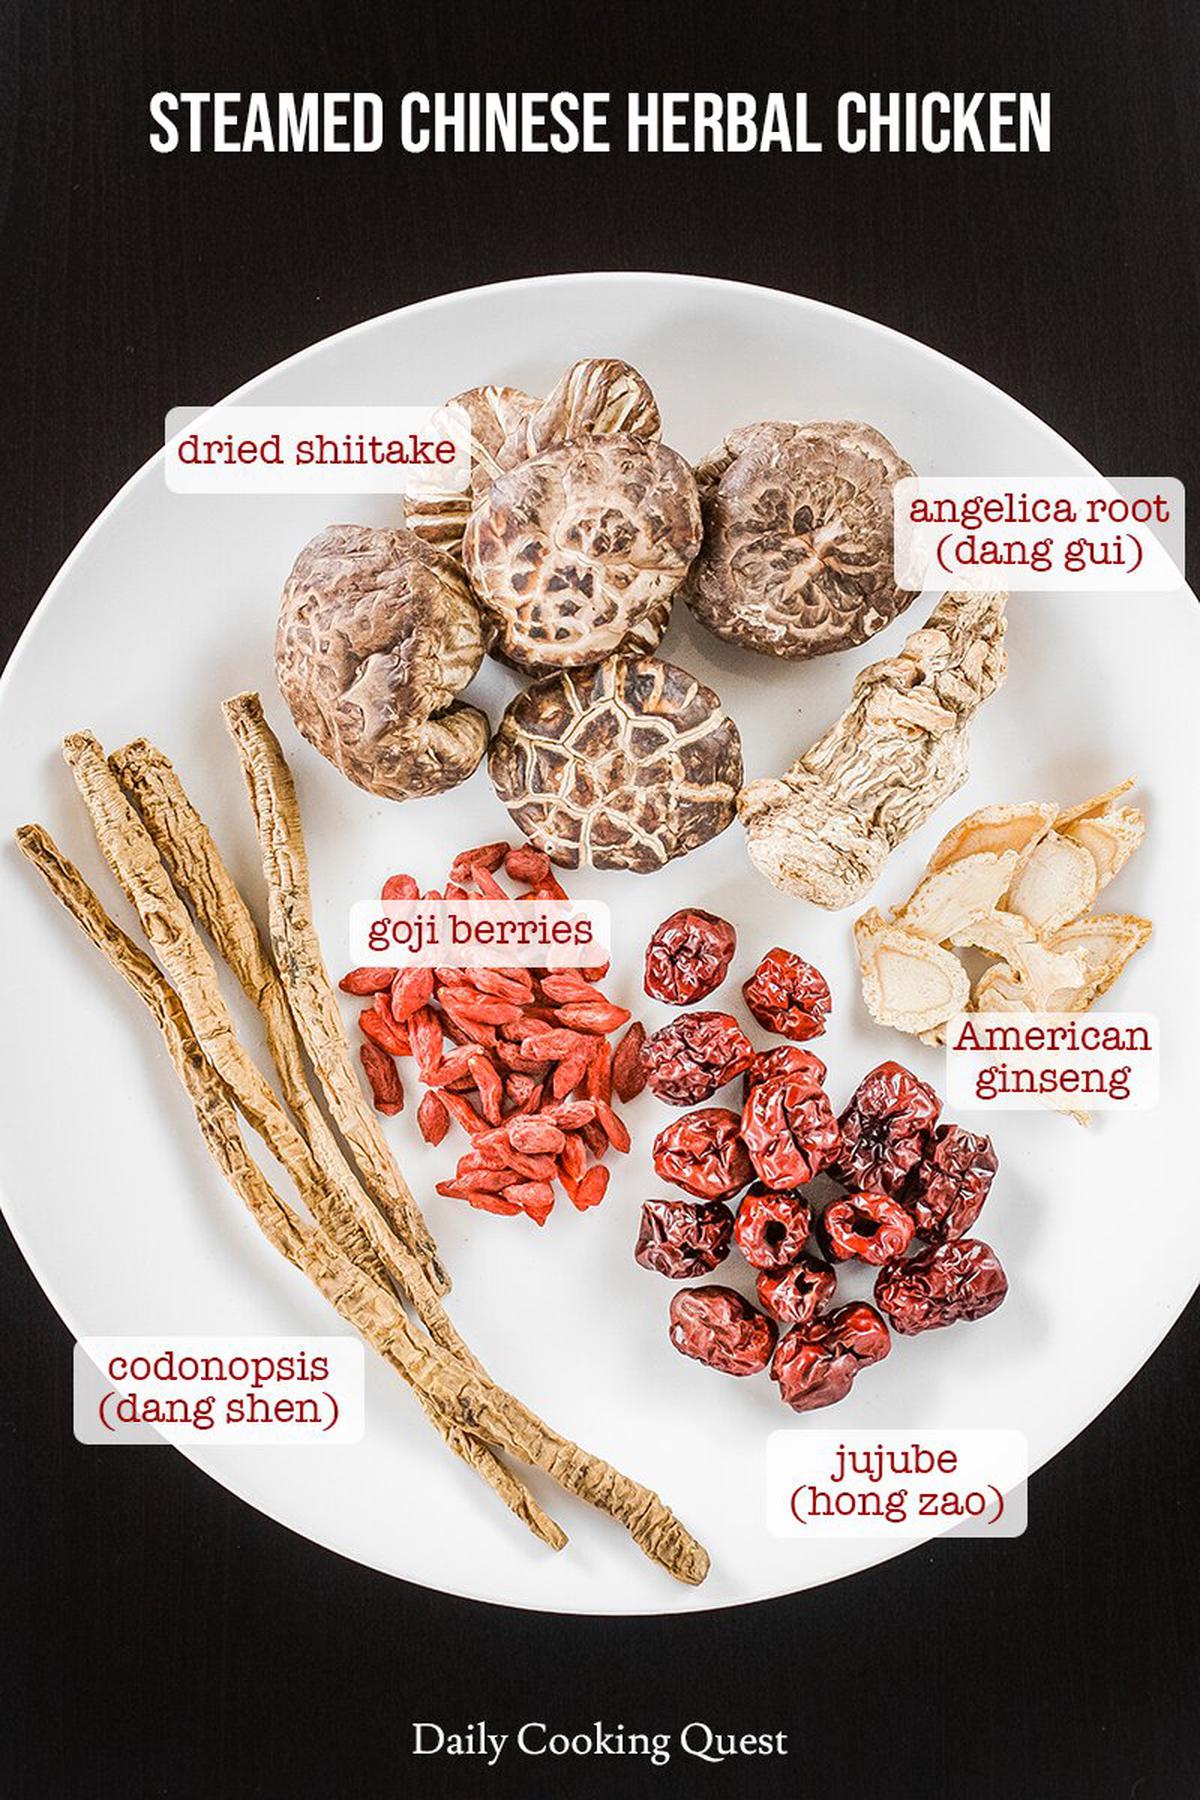 Ingredients for Steamed Chinese Herbal Chicken